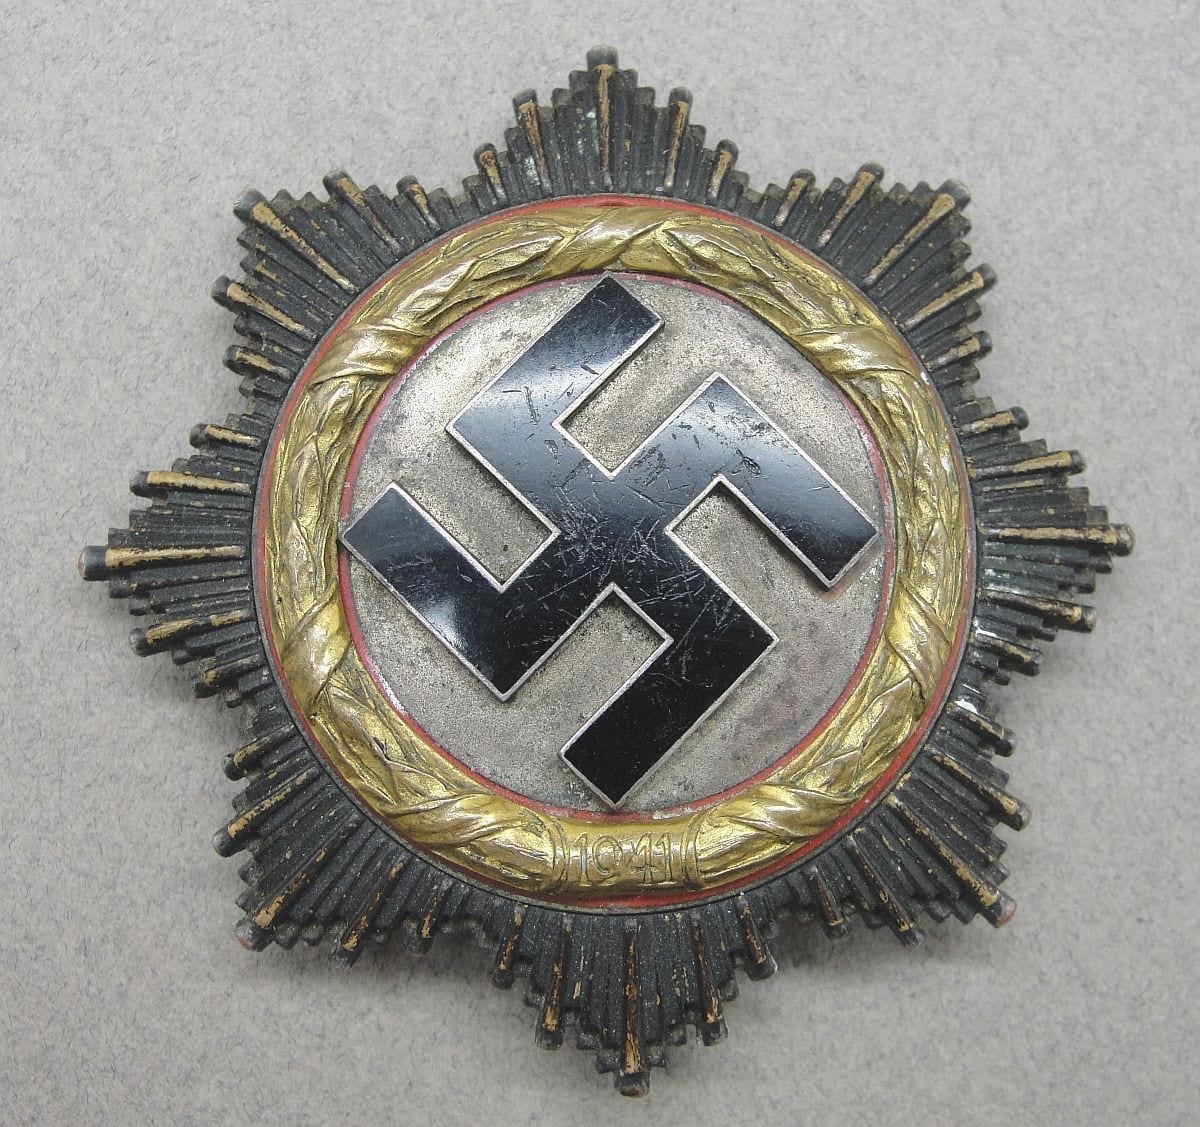 German Cross in Gold - Awarded in Russia Feb 1943, Named to Recipient